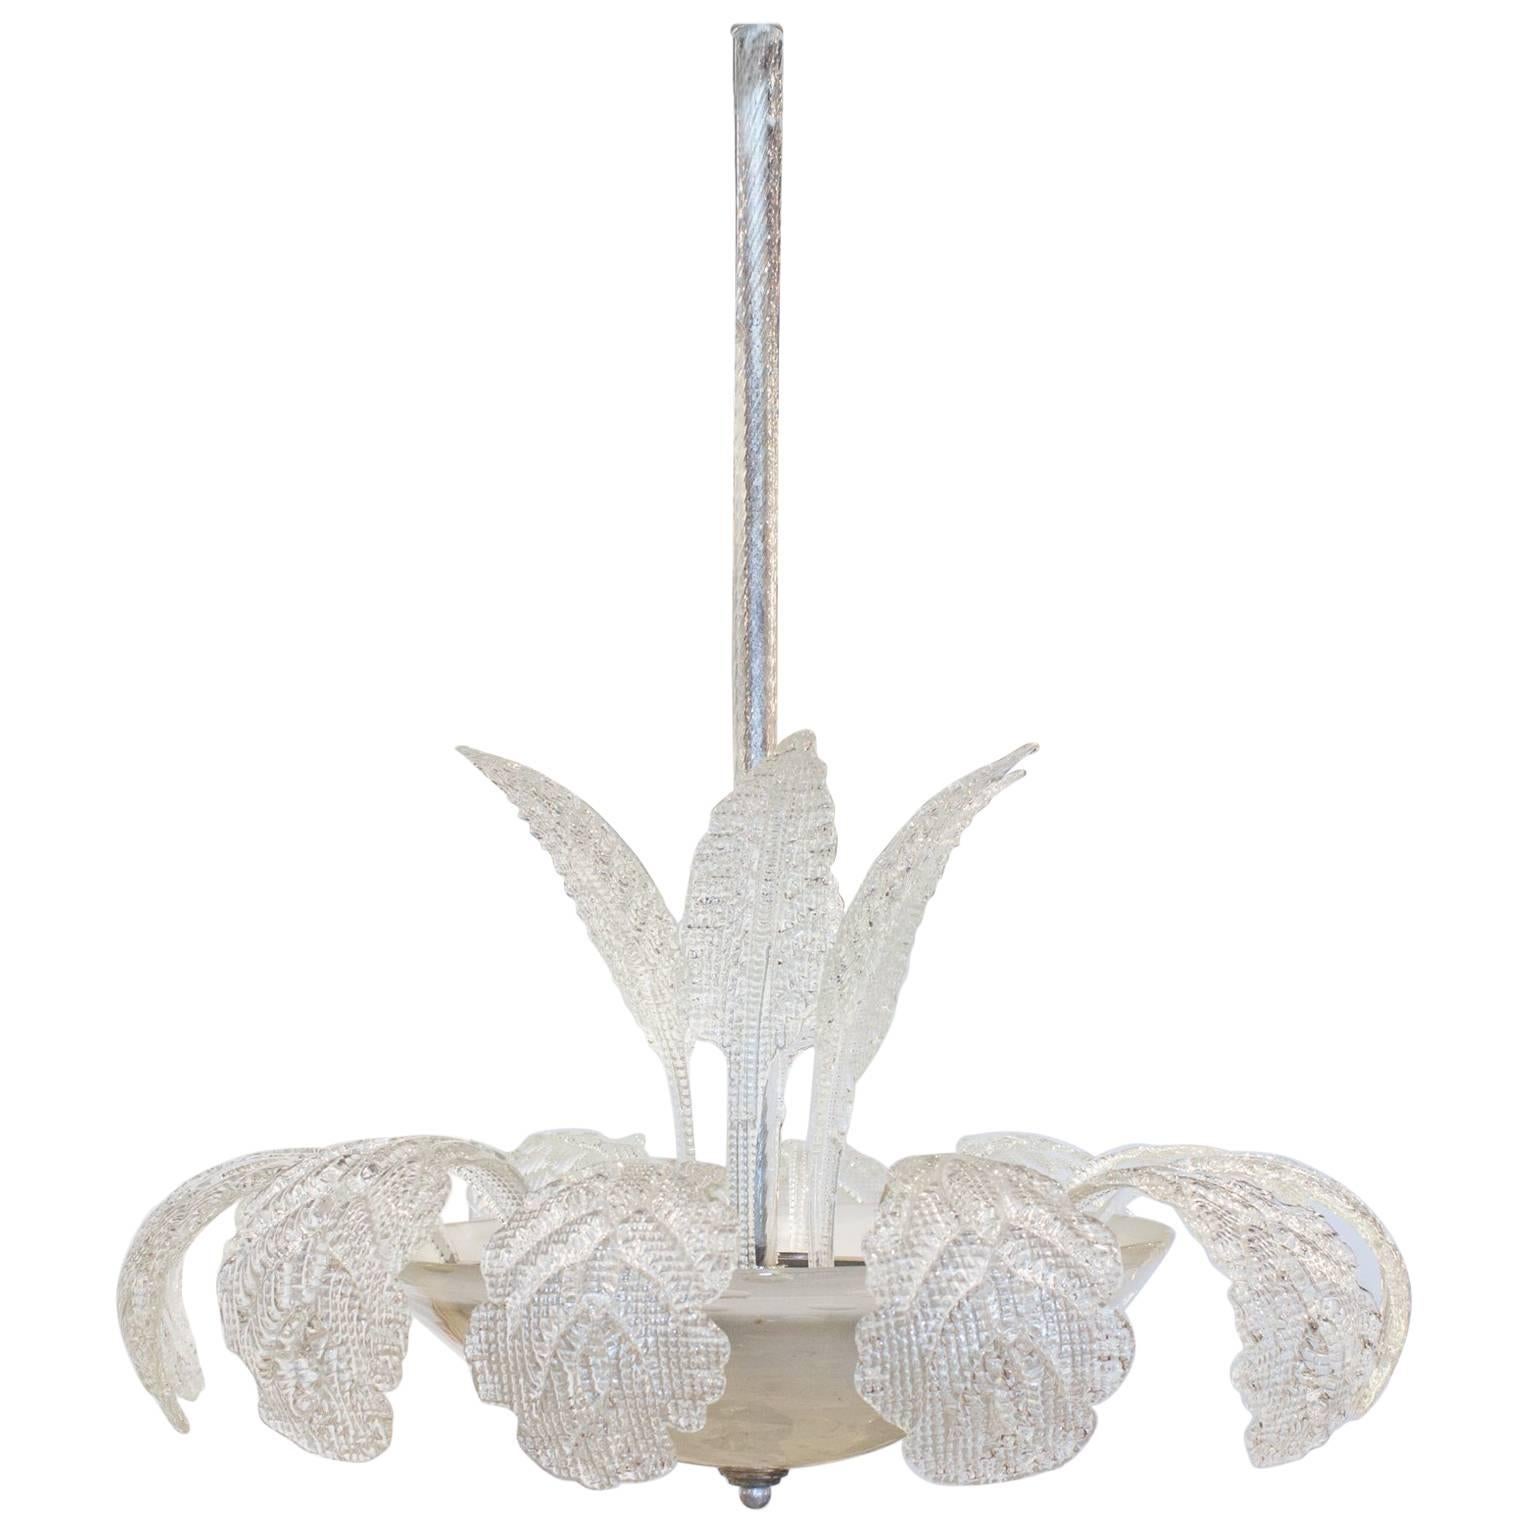 Midcentury Murano Glass Chandelier with Leaf and Palm Fronds